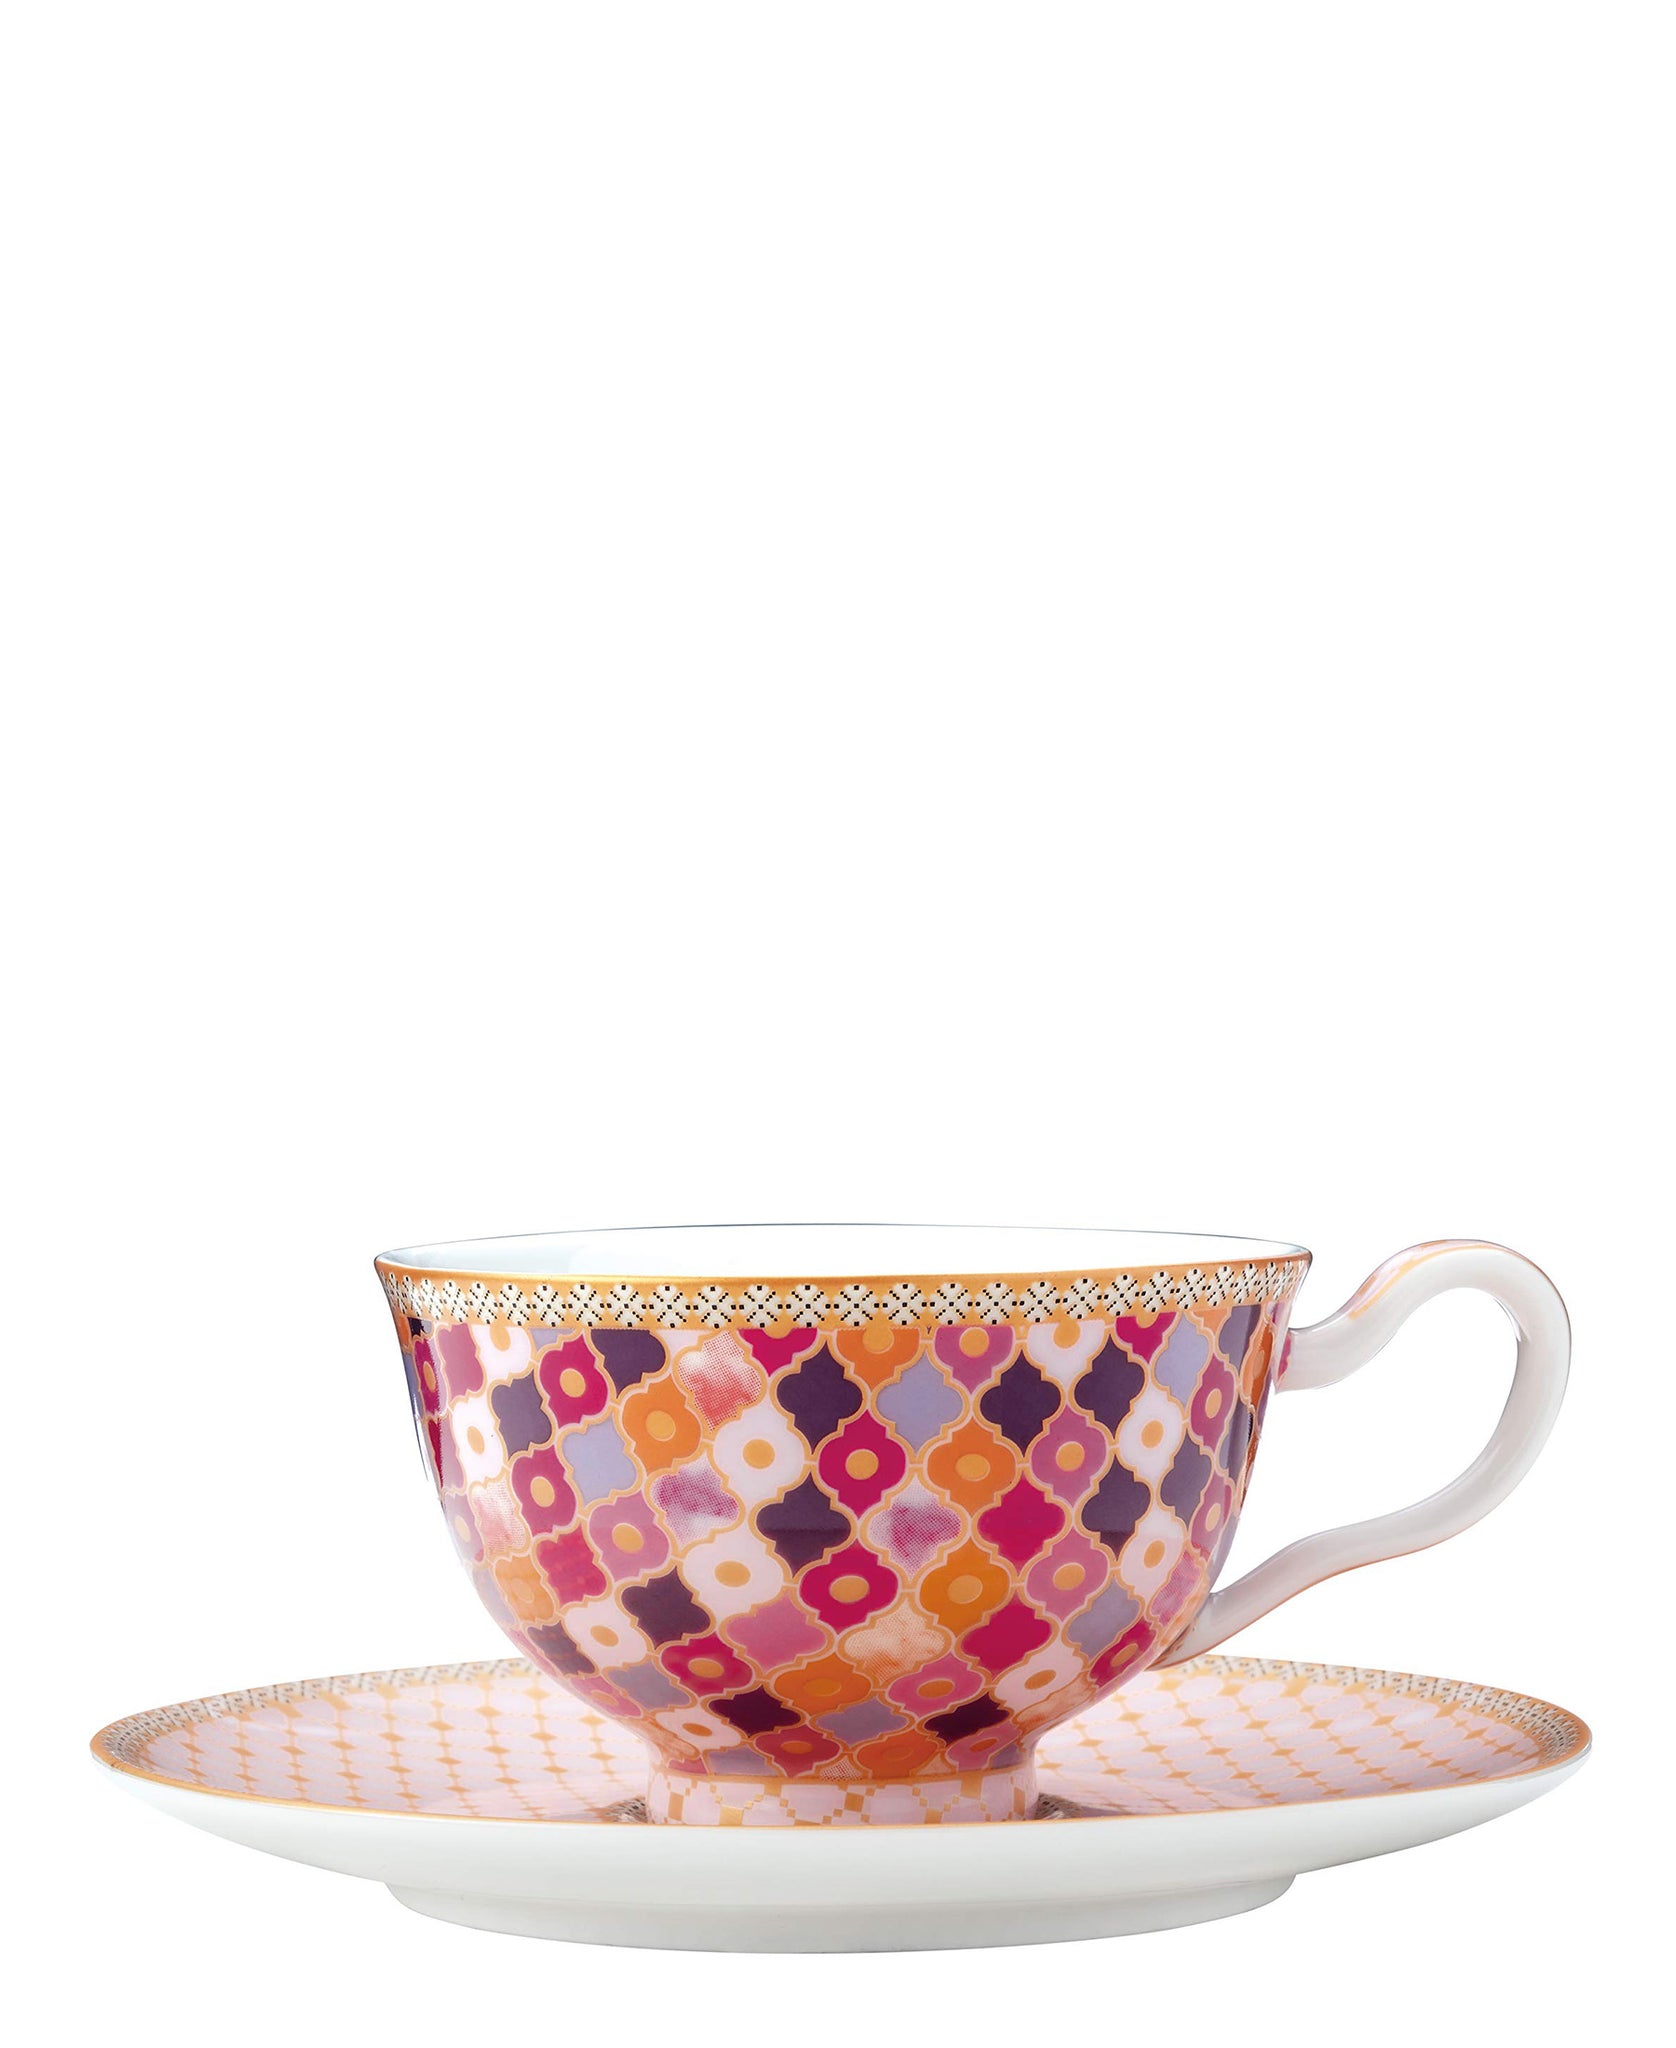 Maxwell & Williams Teas & C's Kasbah Mint 200ml Footed Cup & Saucer - Pink